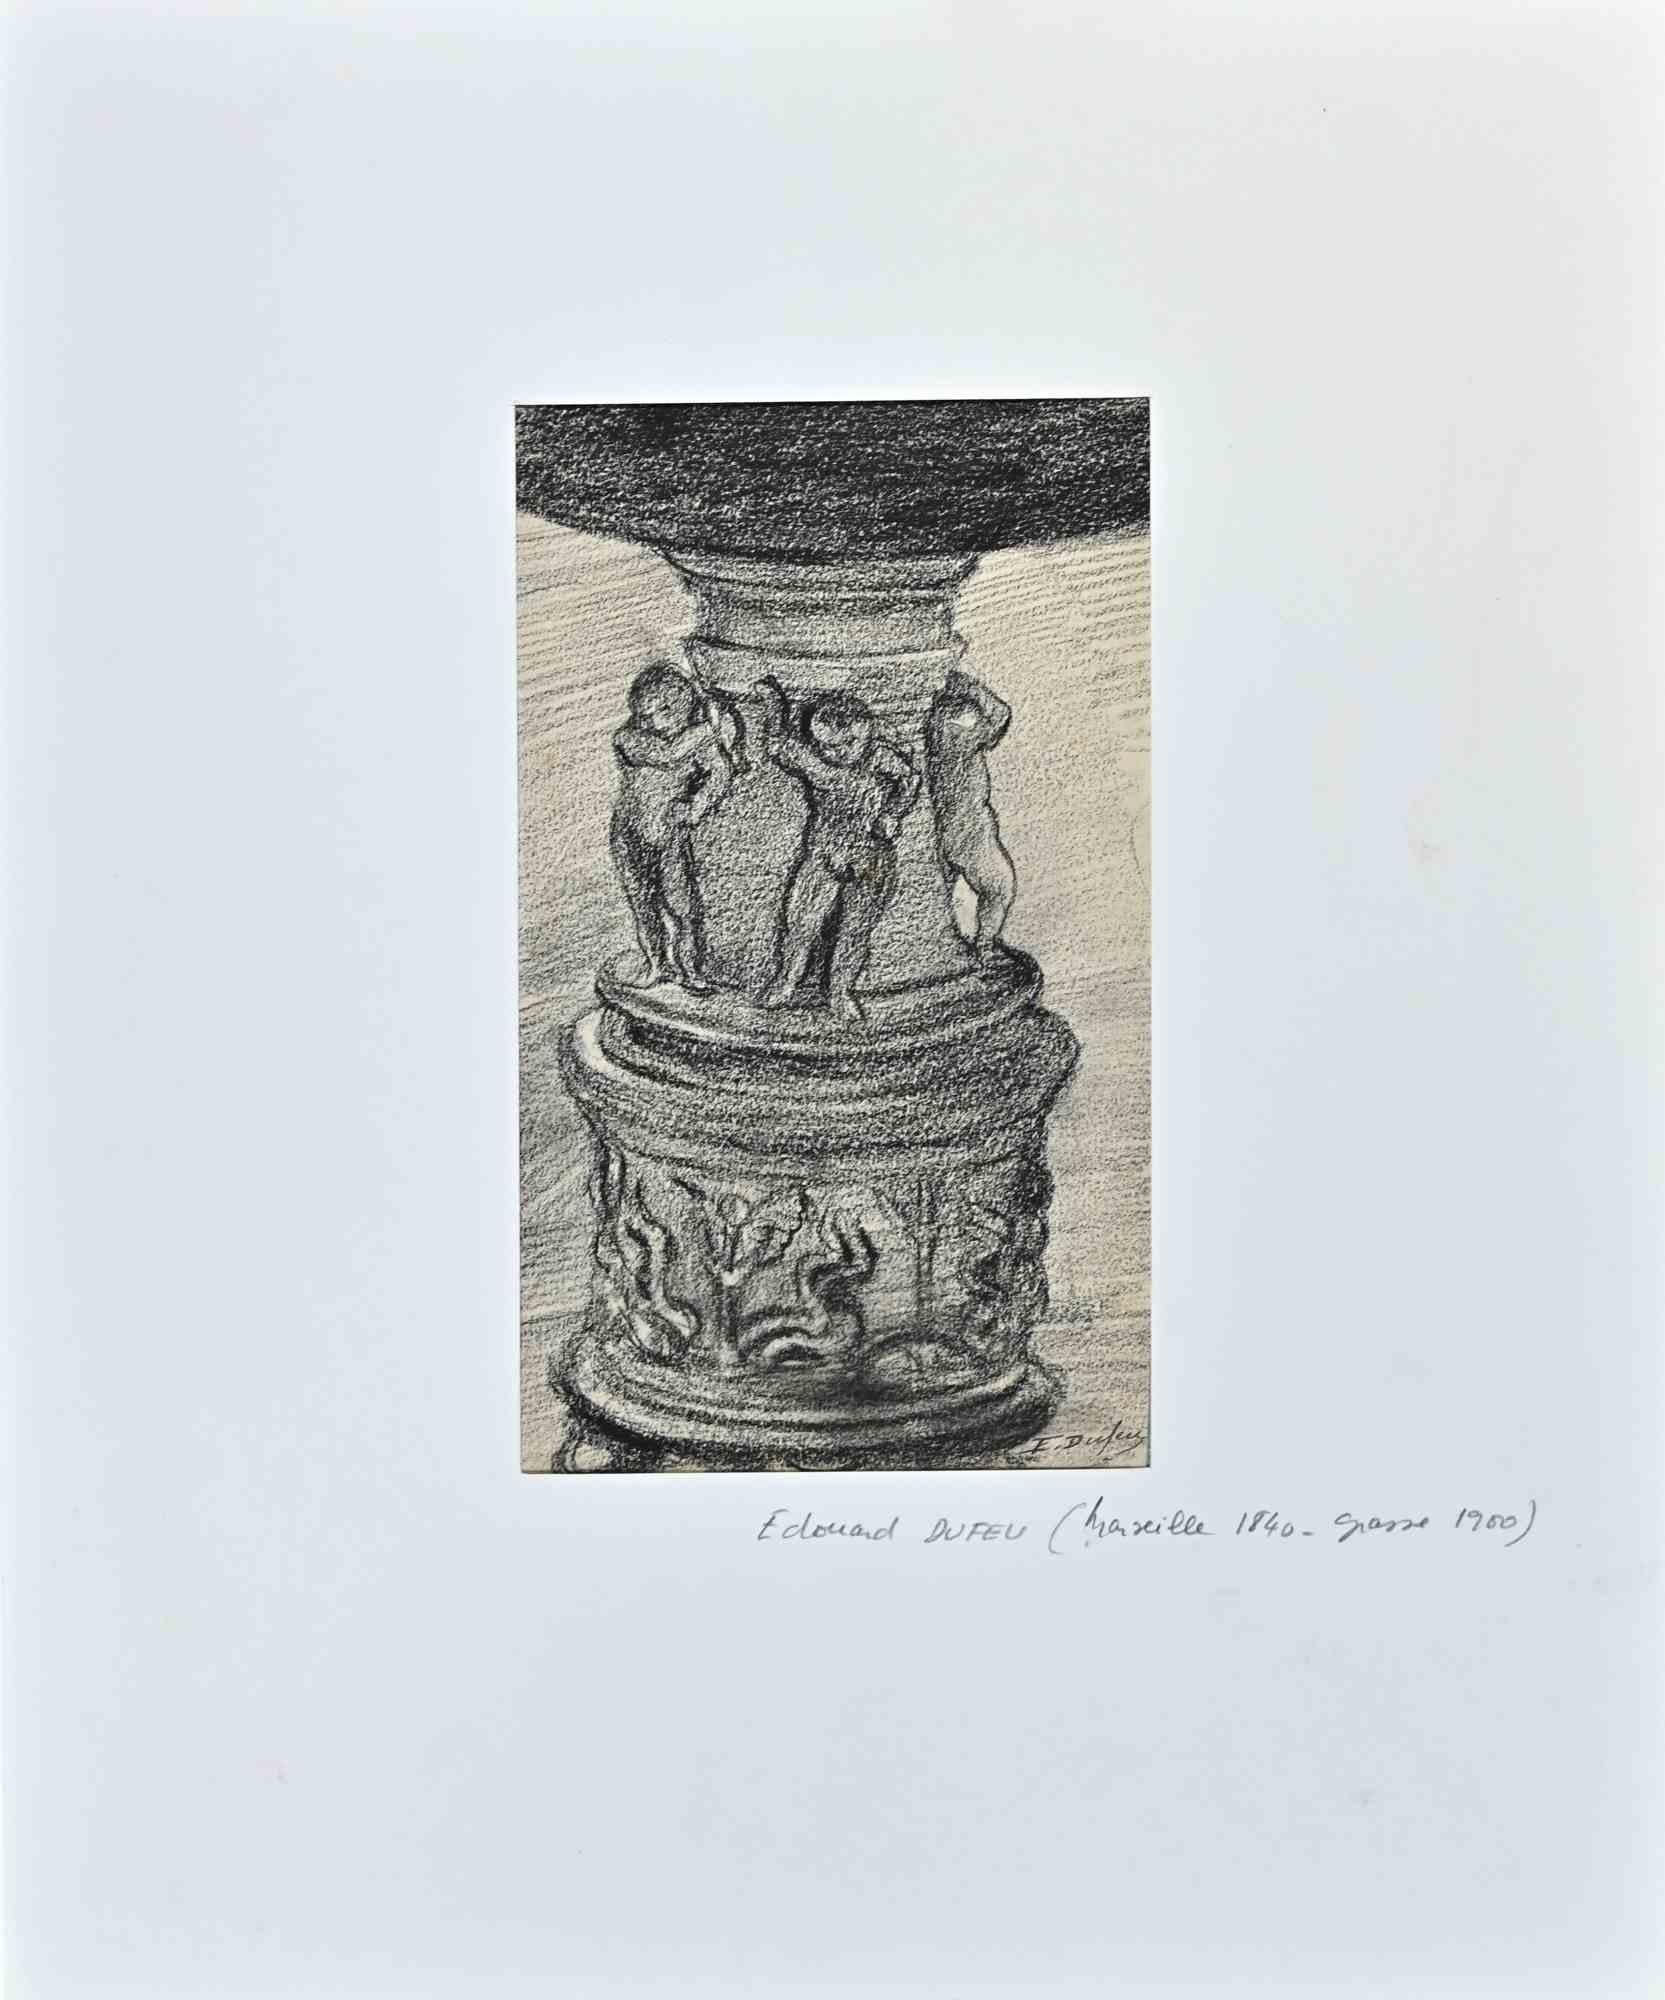 The Vase is an original charcoal drawing on paper realized by Edouard Dufeu in the mid-20th century.

Hand-signed on the lower.

Included a white Passepartout: 37 x30 cm

Good conditions.

The artwork is represented through deft strokes in a